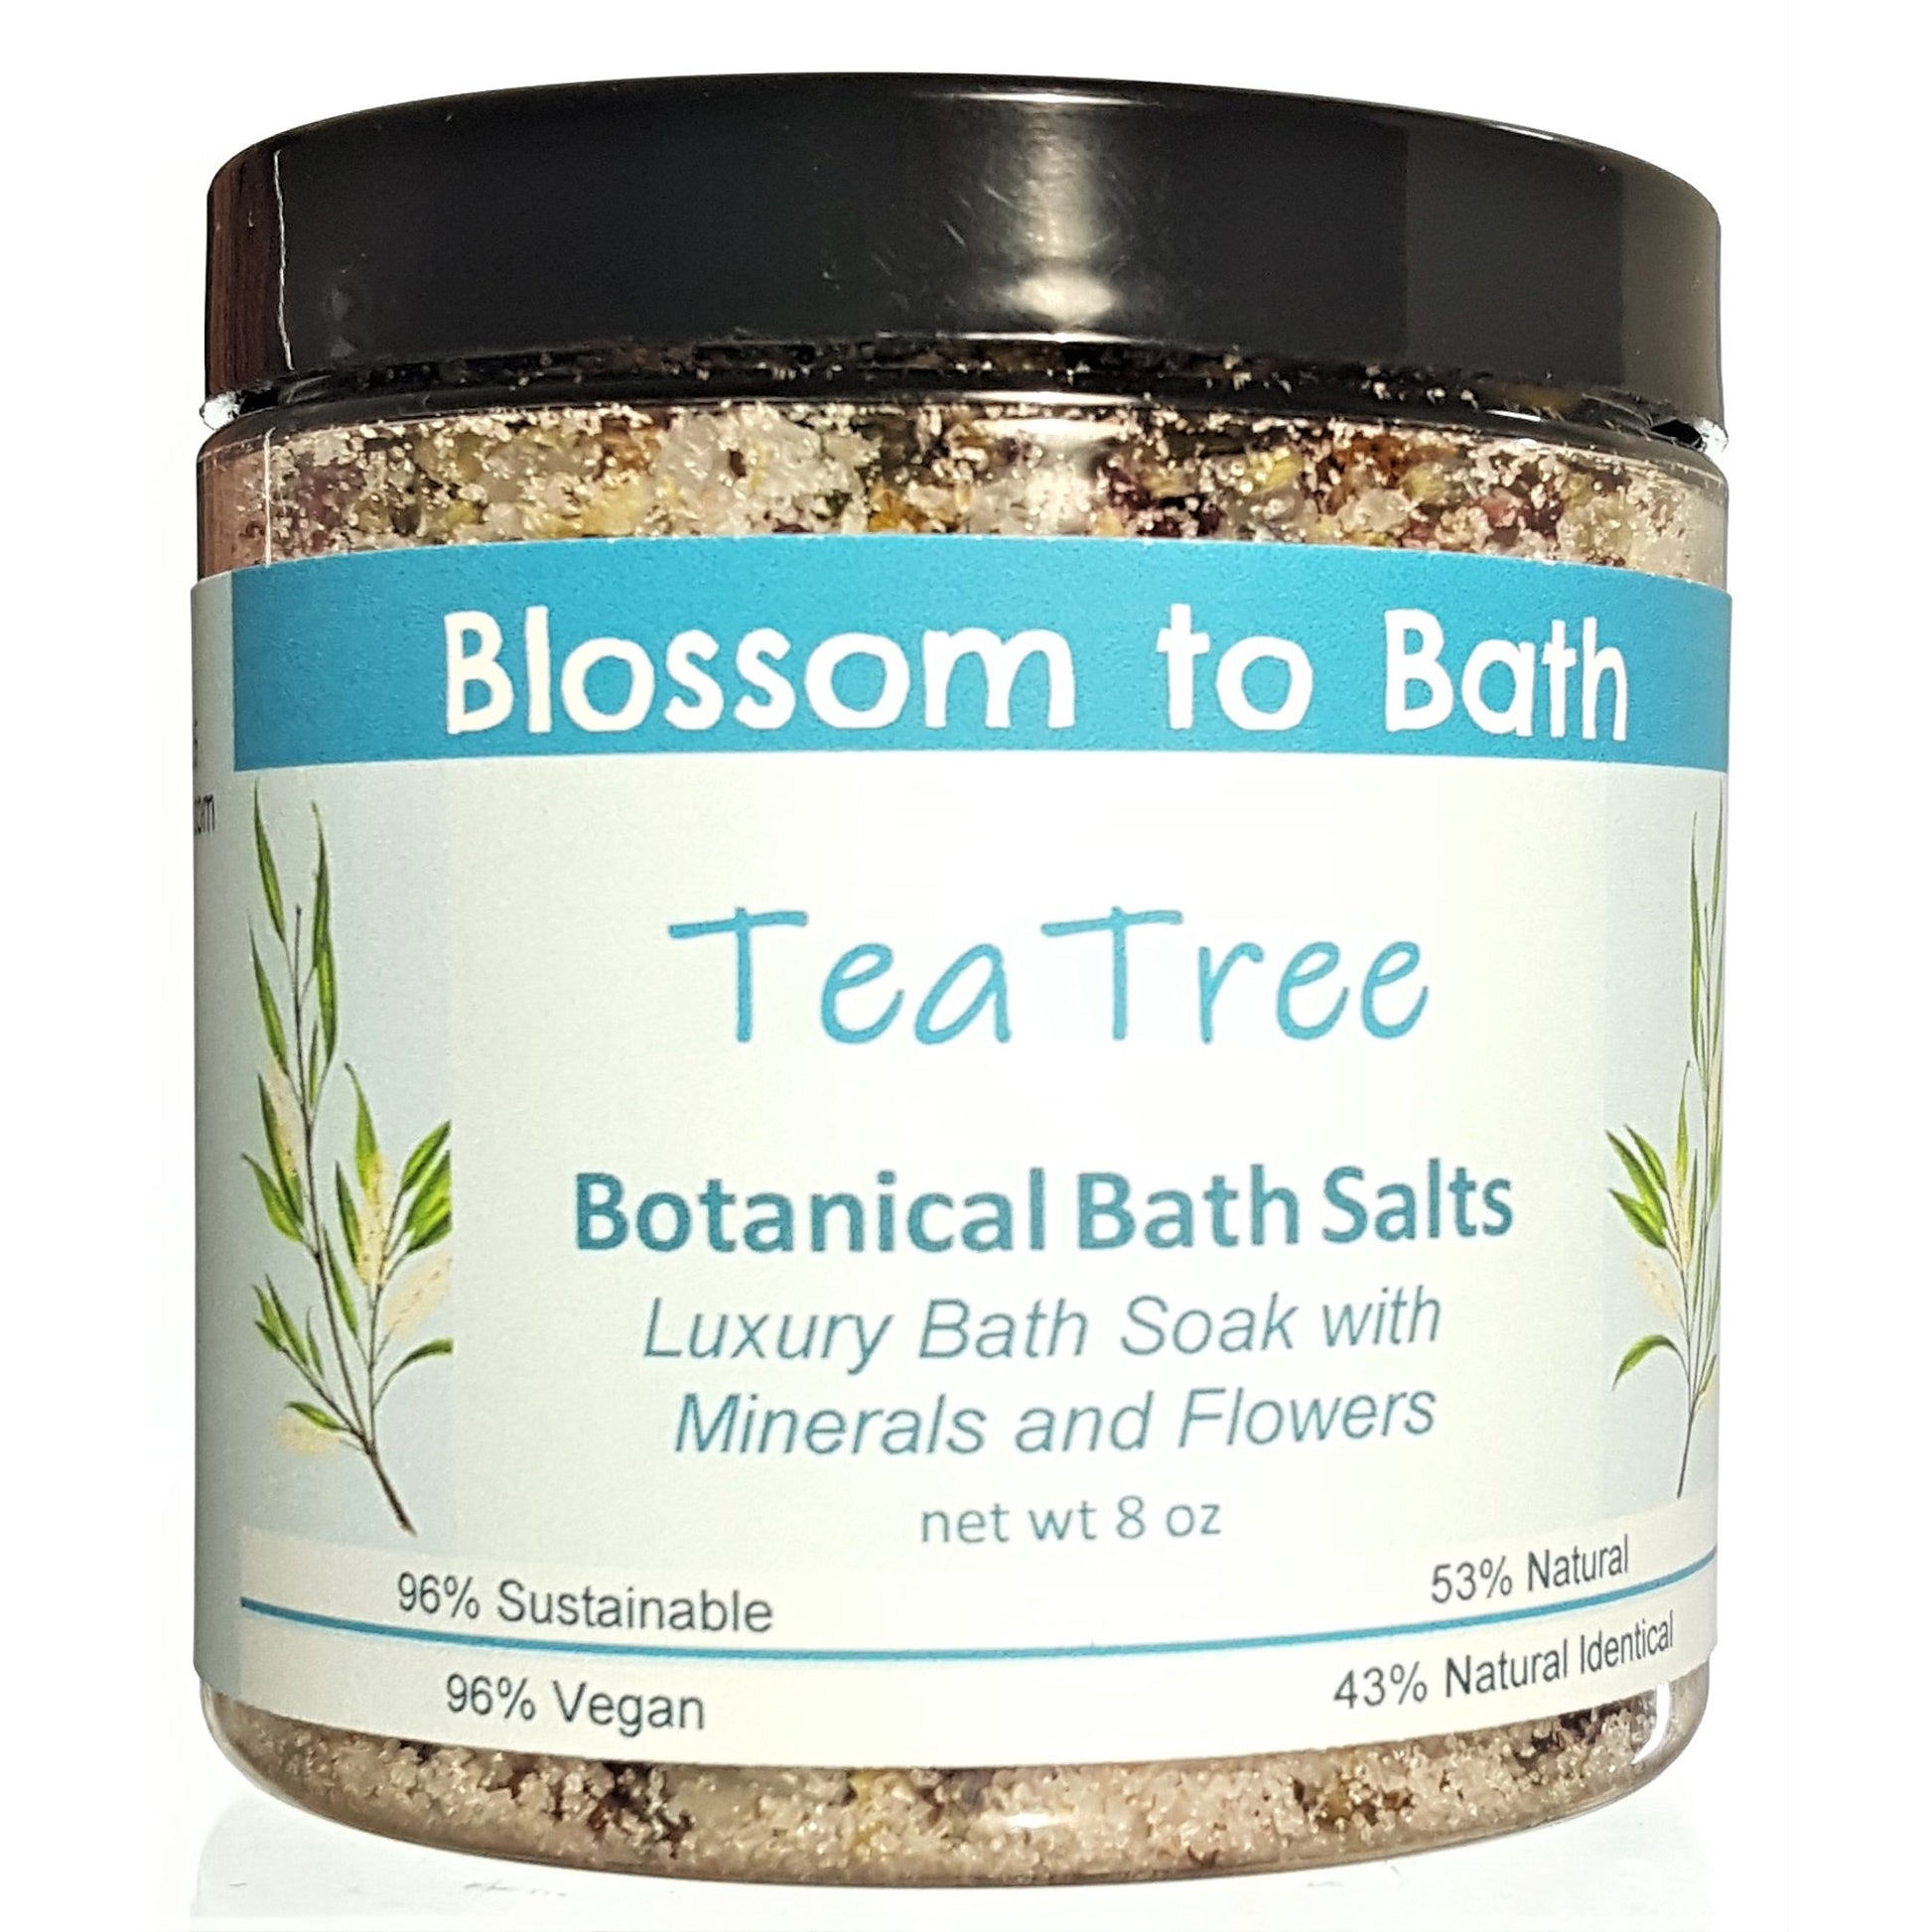 Buy Blossom to Bath Tea Tree Botanical Bath Salts from Flowersong Soap Studio.  A hand selected variety of skin loving botanicals and mineral rich salts for a unique, luxurious soaking experience  Tea tree's fresh fragrance embodies a deep down clean.